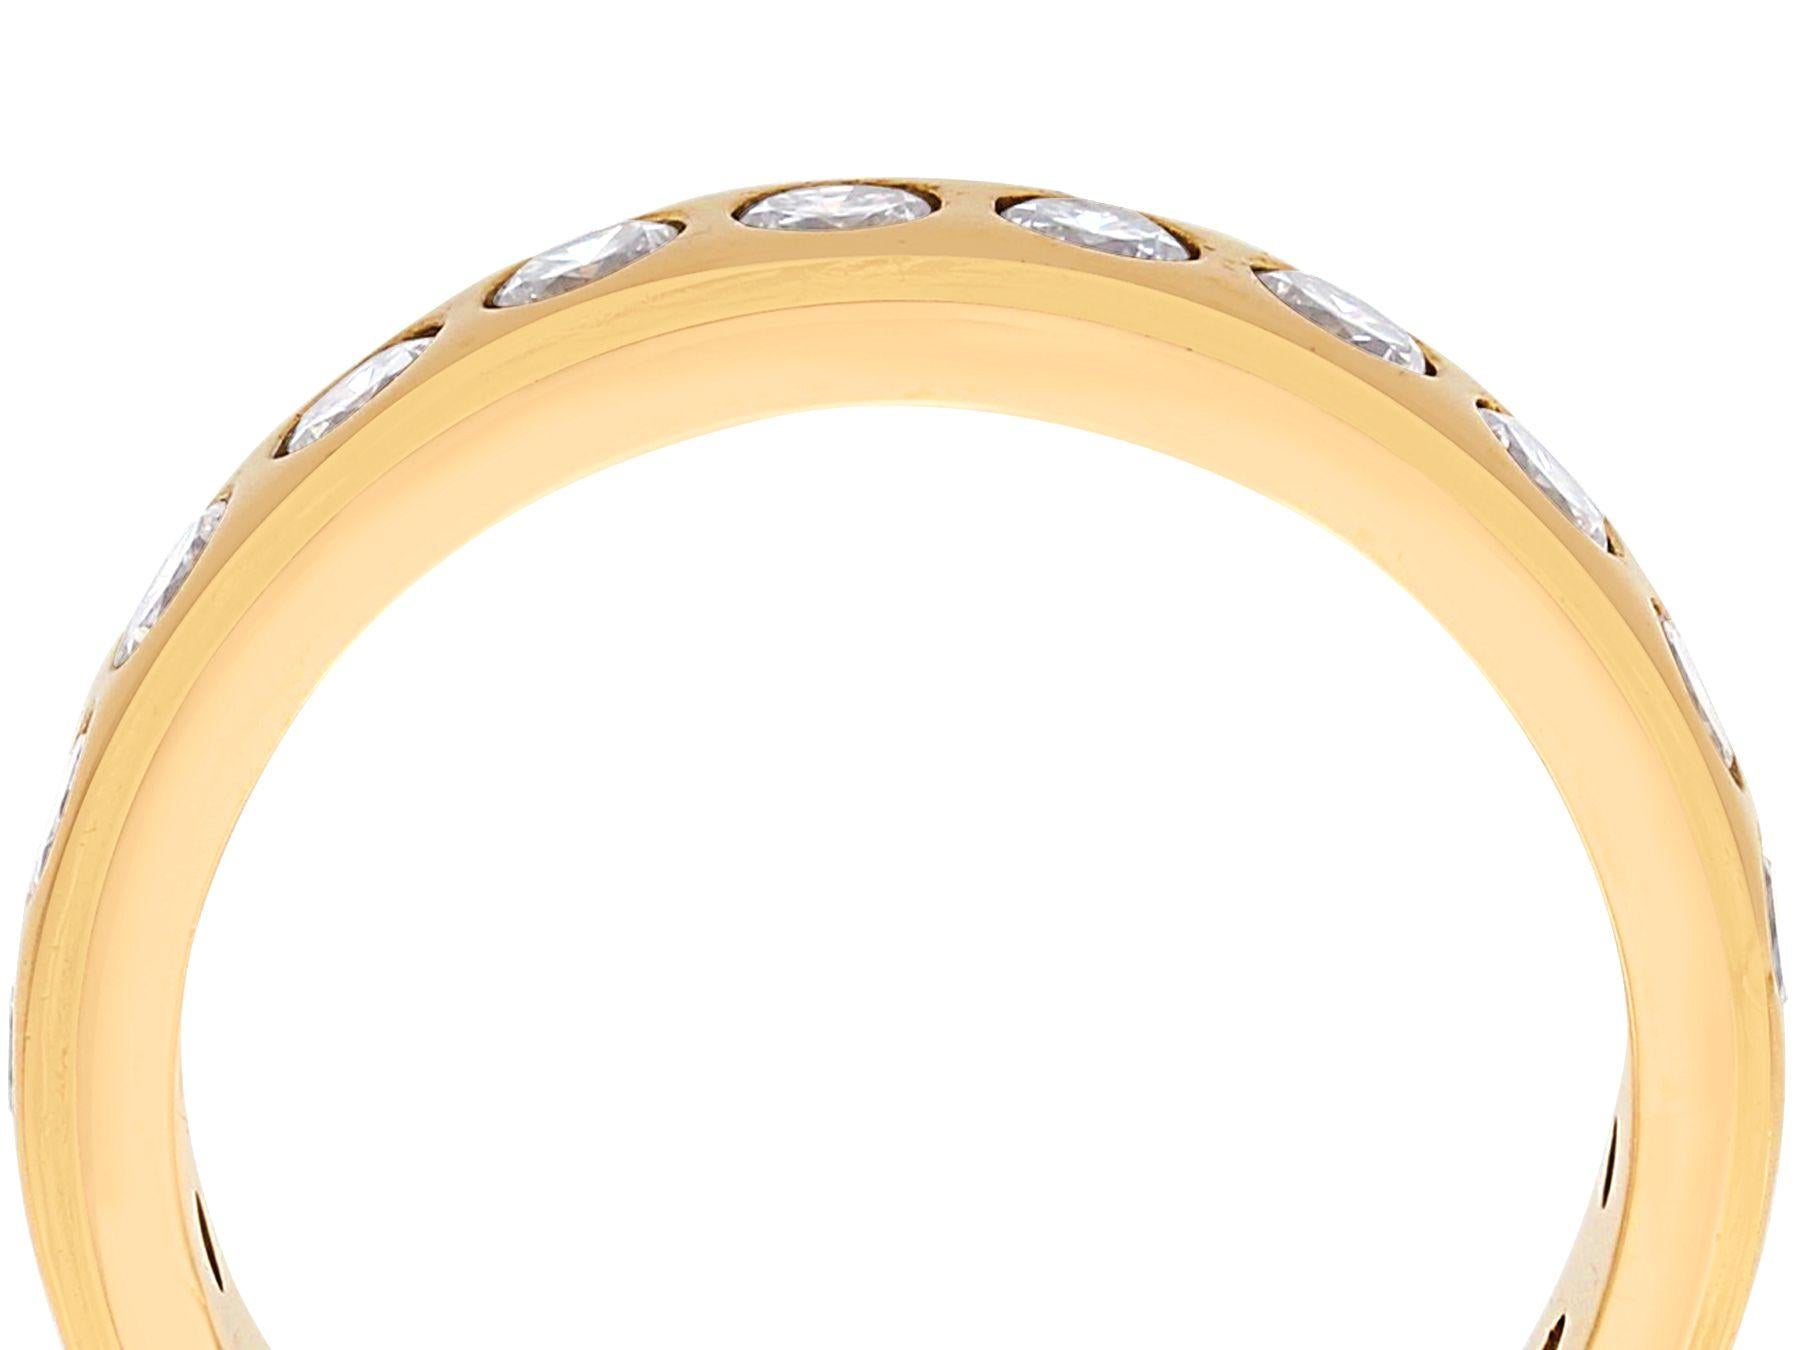 A stunning vintage 1960s 1.76 carat diamond and 18 karat yellow gold full eternity ring; part of our diverse diamond jewelry and estate jewelry collections.

This stunning, fine and impressive vintage eternity ring has been crafted in 18k yellow